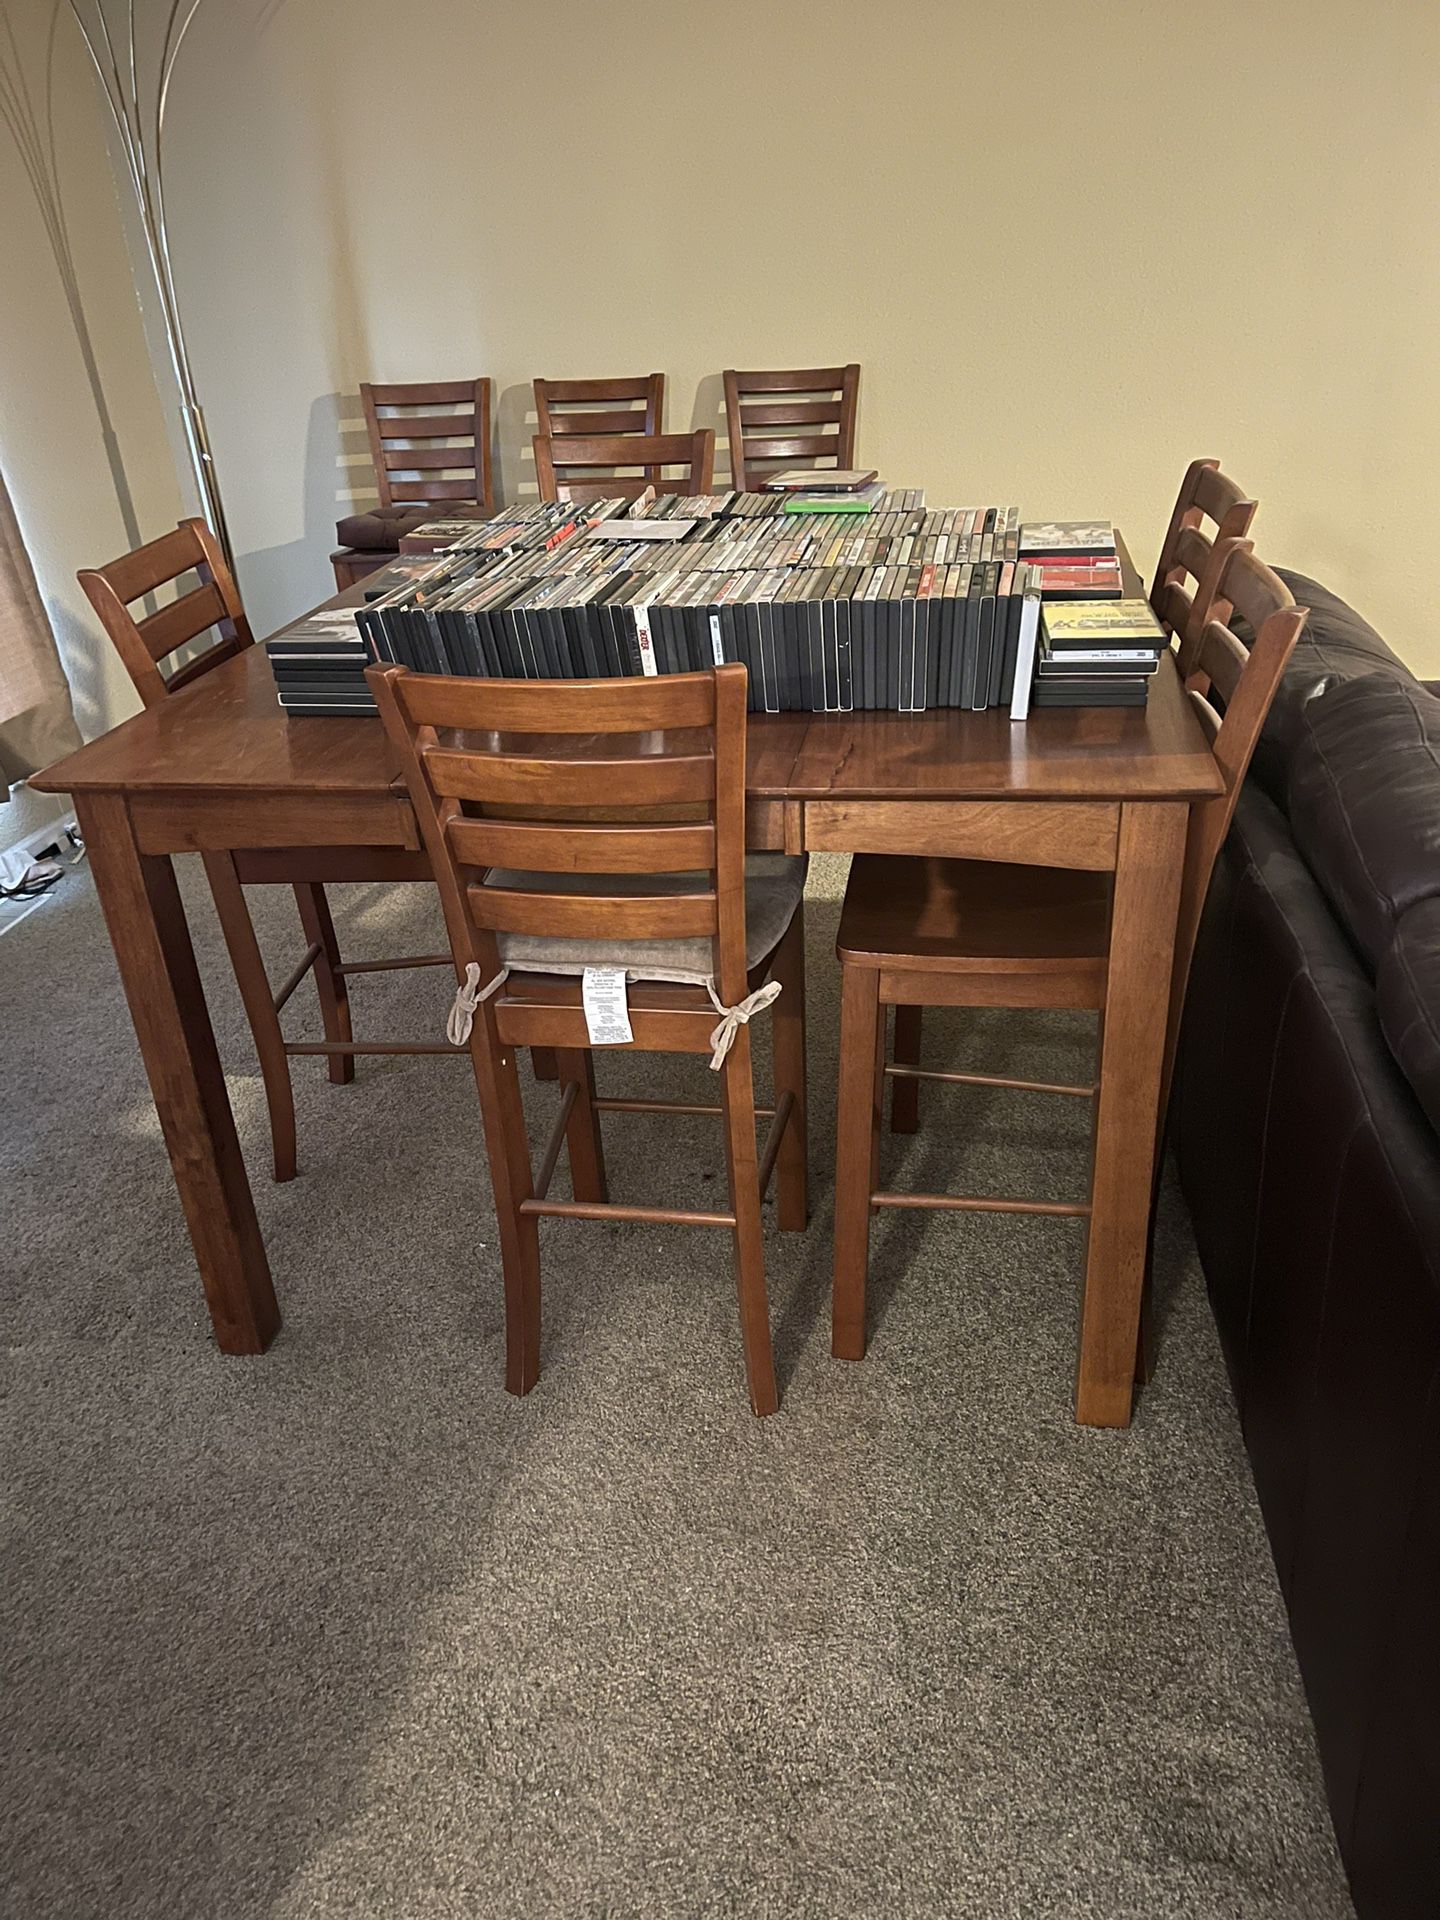 Dining Table Seats 4, 6, 8 people